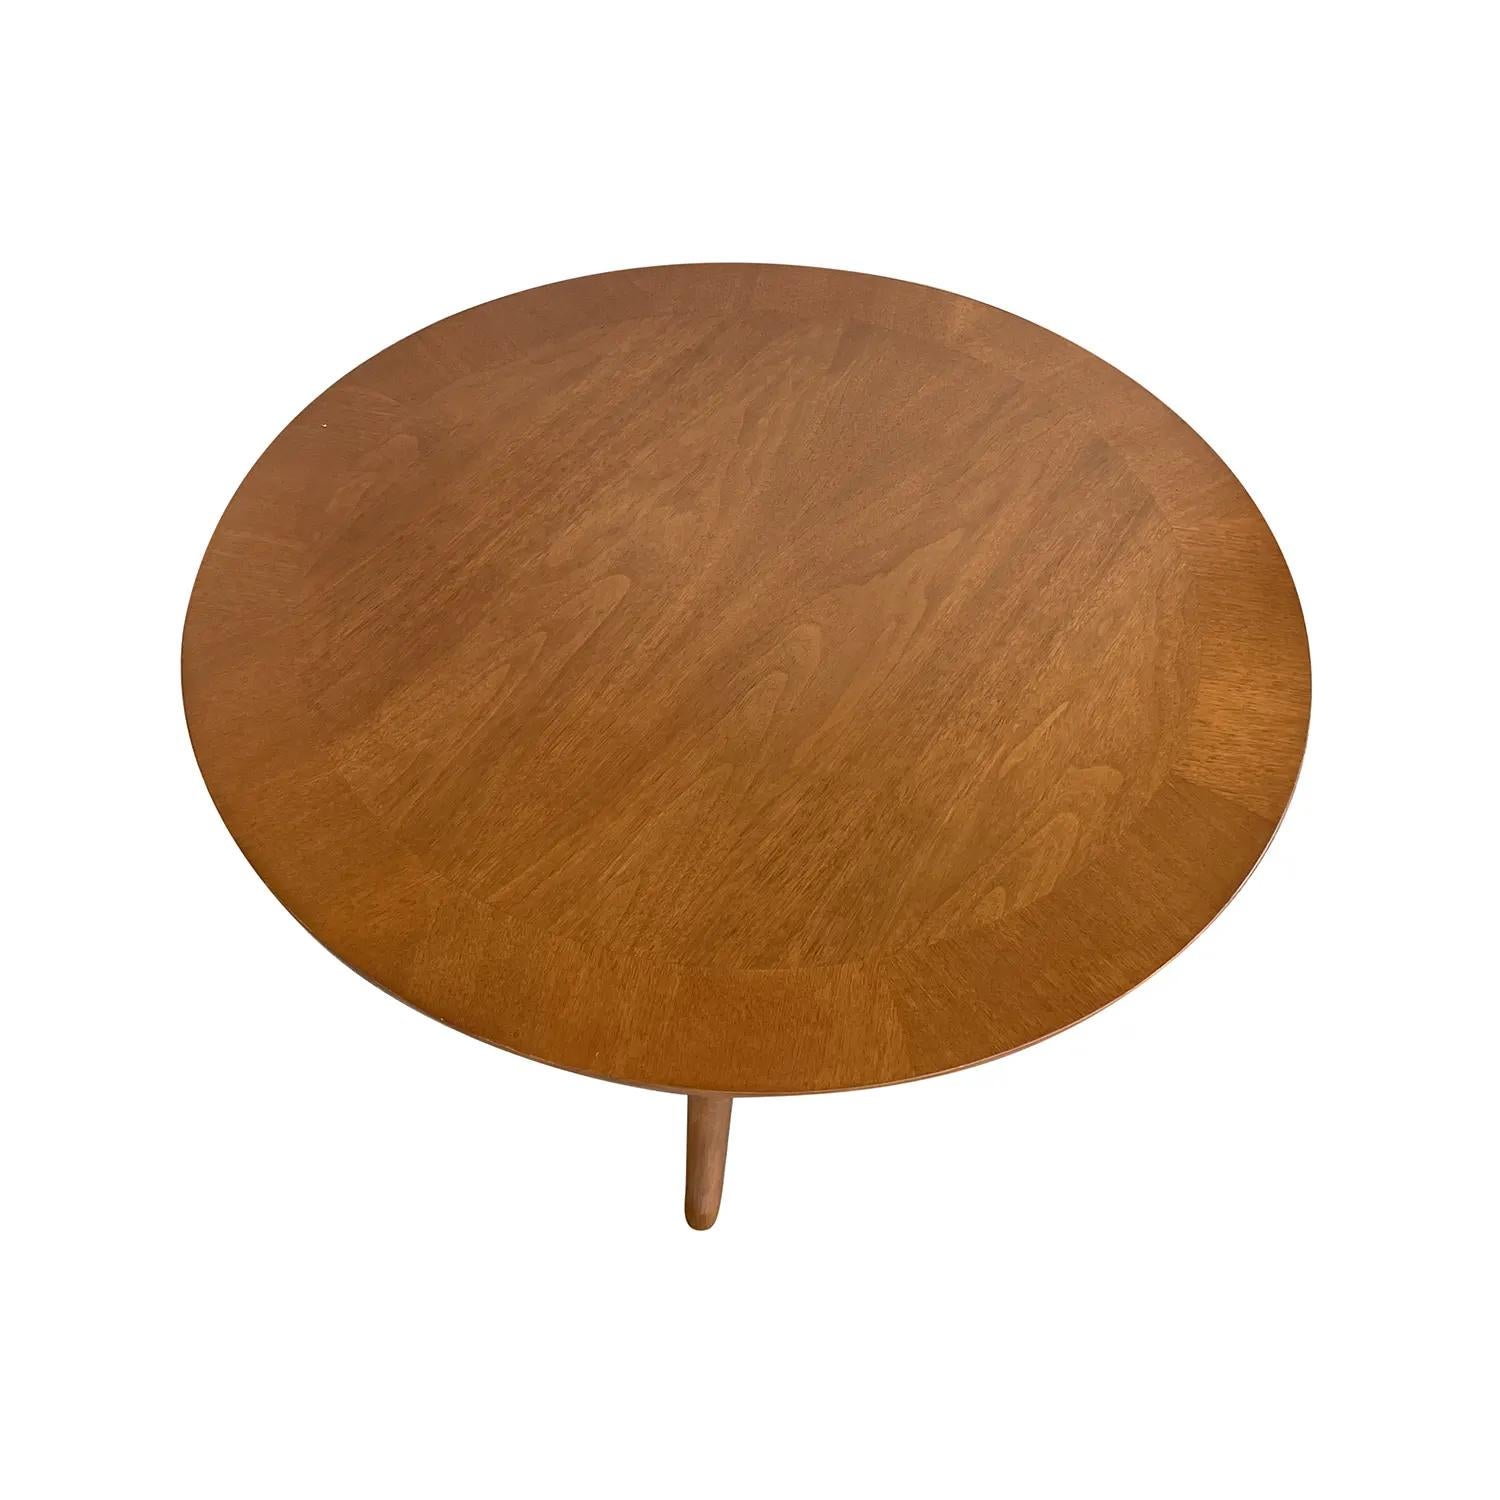 20th Century American Widdicomb Walnut Cocktail Table by T.H. Robsjohn-Gibbings For Sale 2